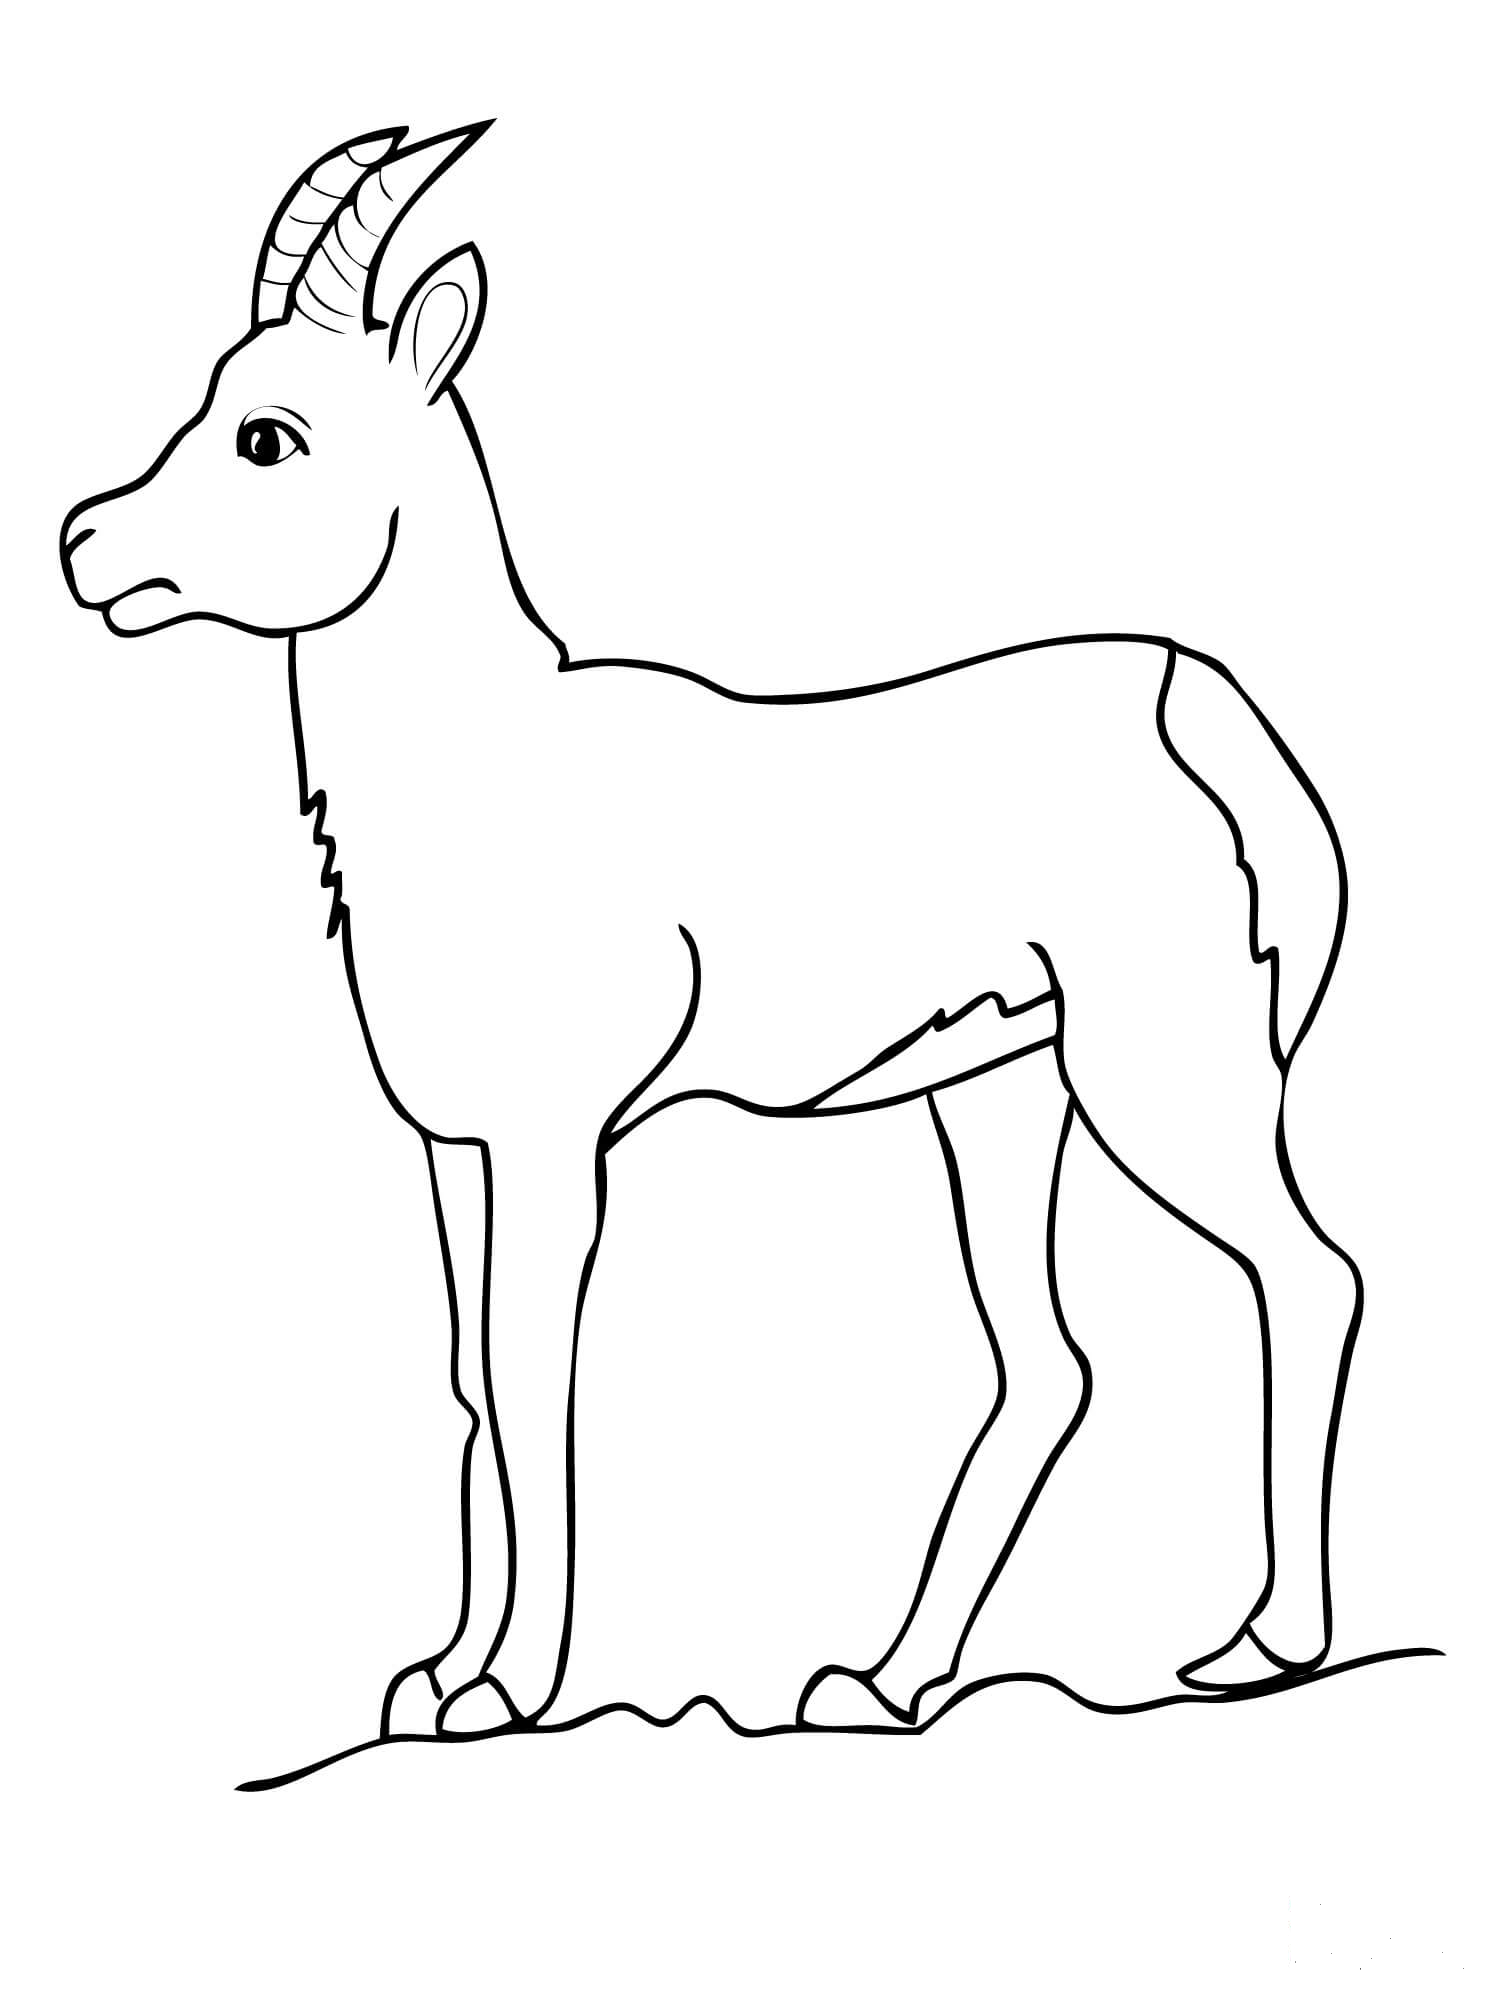 Chamois Goat Antelope coloring page - ColouringPages